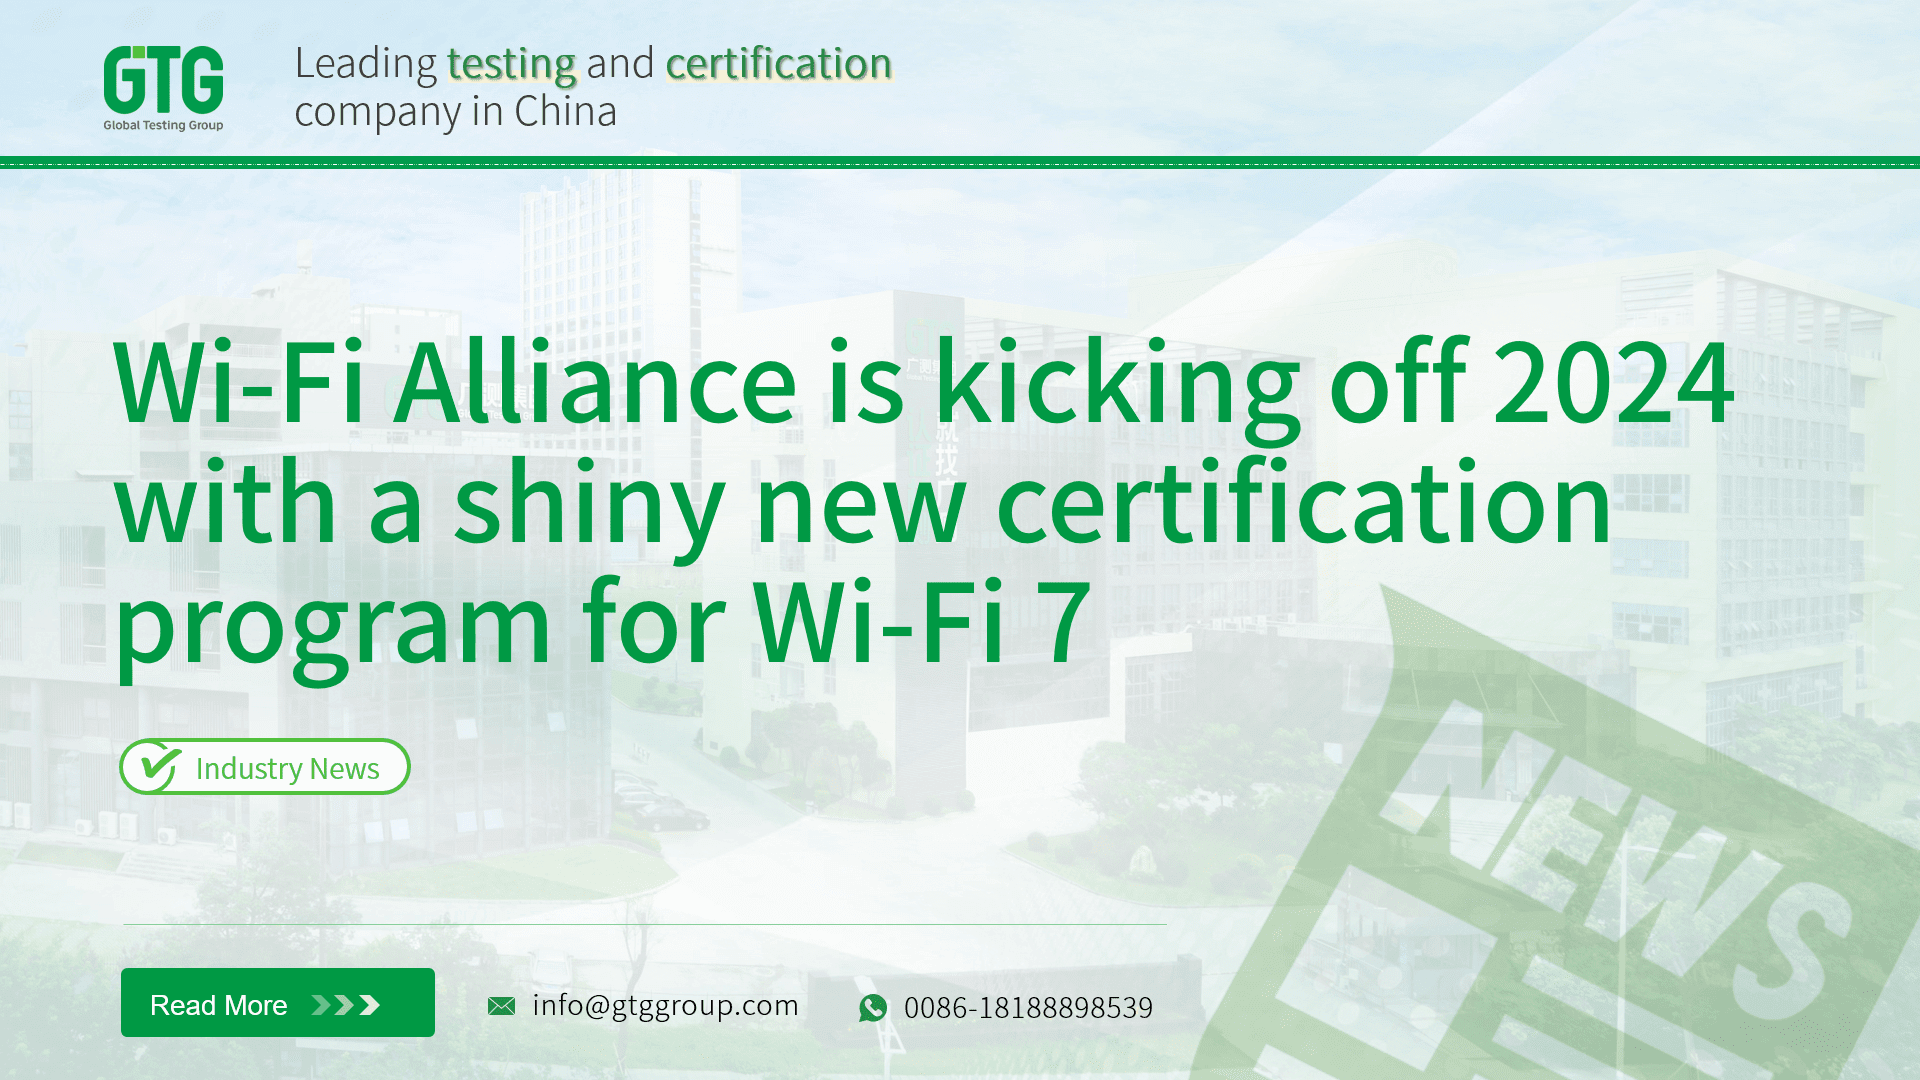 Wi-Fi Alliance is kicking off 2024 with a shiny new certification program for Wi-Fi 7